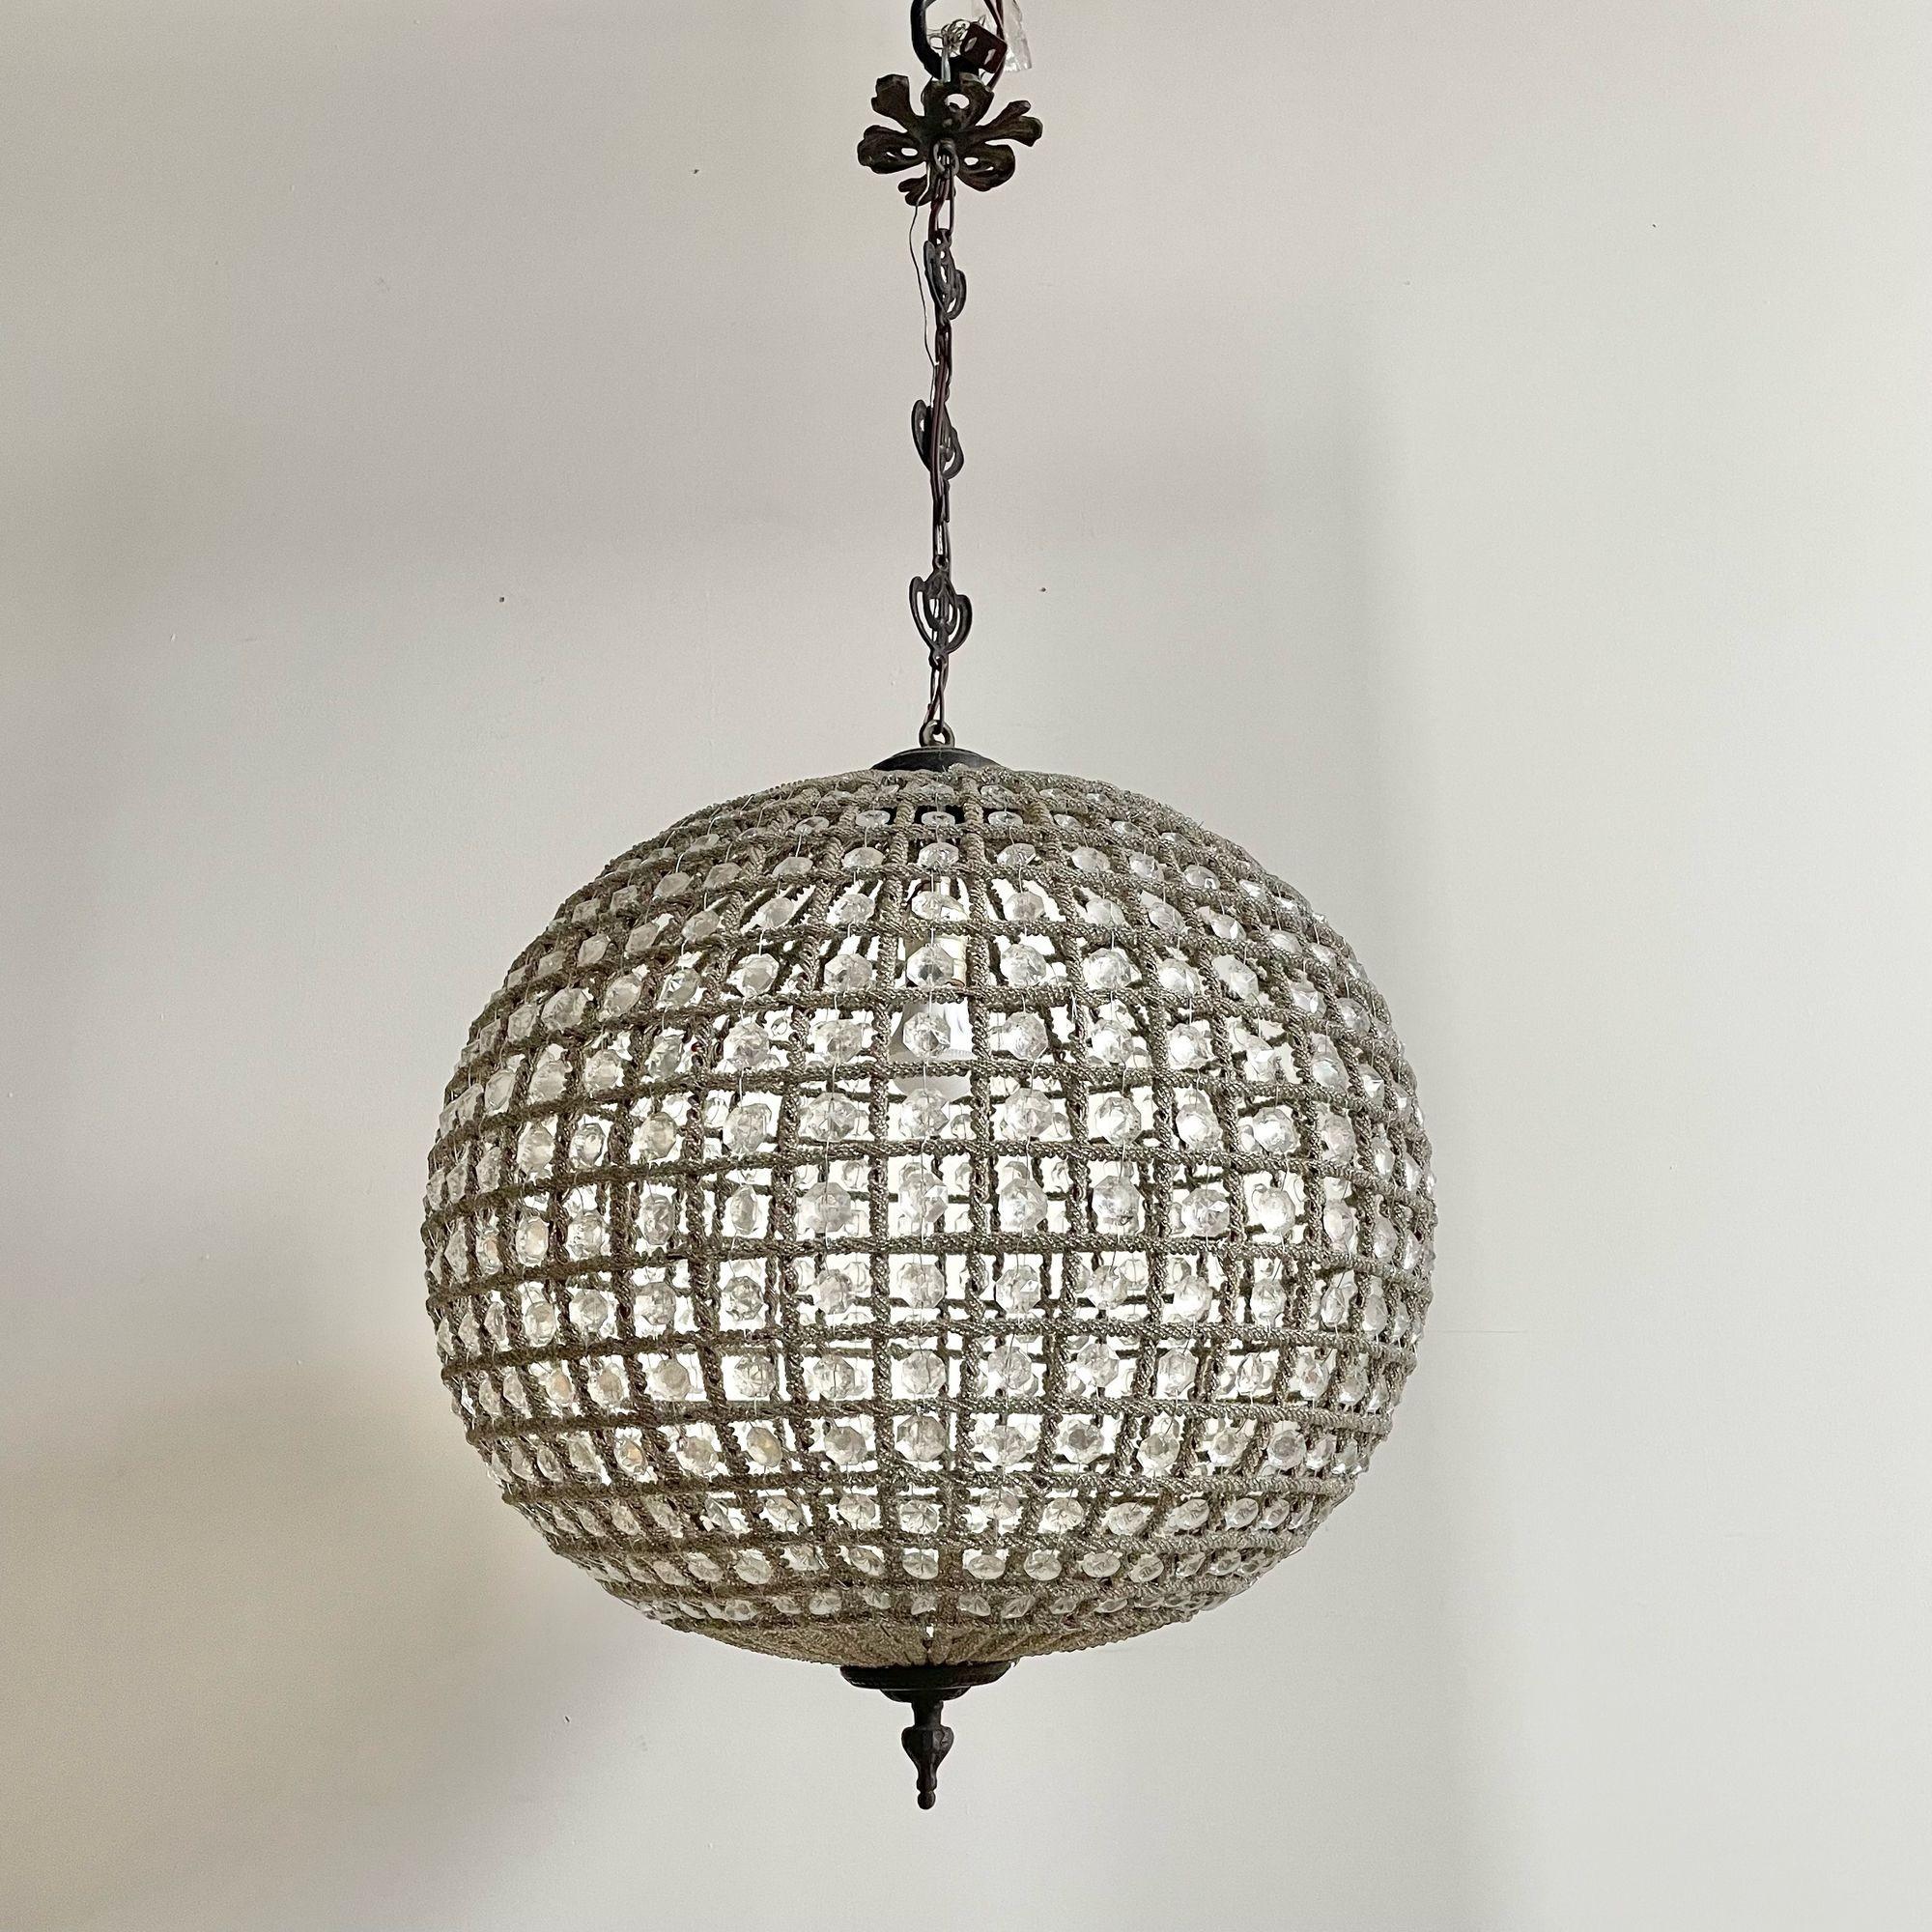 Art Deco, Round Chandeliers, Beveled Crystal, Metal, United States, 1980s

A detailed pair of circular globe mesh wired and crystal lights. Exquisite pendant chandeliers, each in round shape wired with crystals. Each having a 15